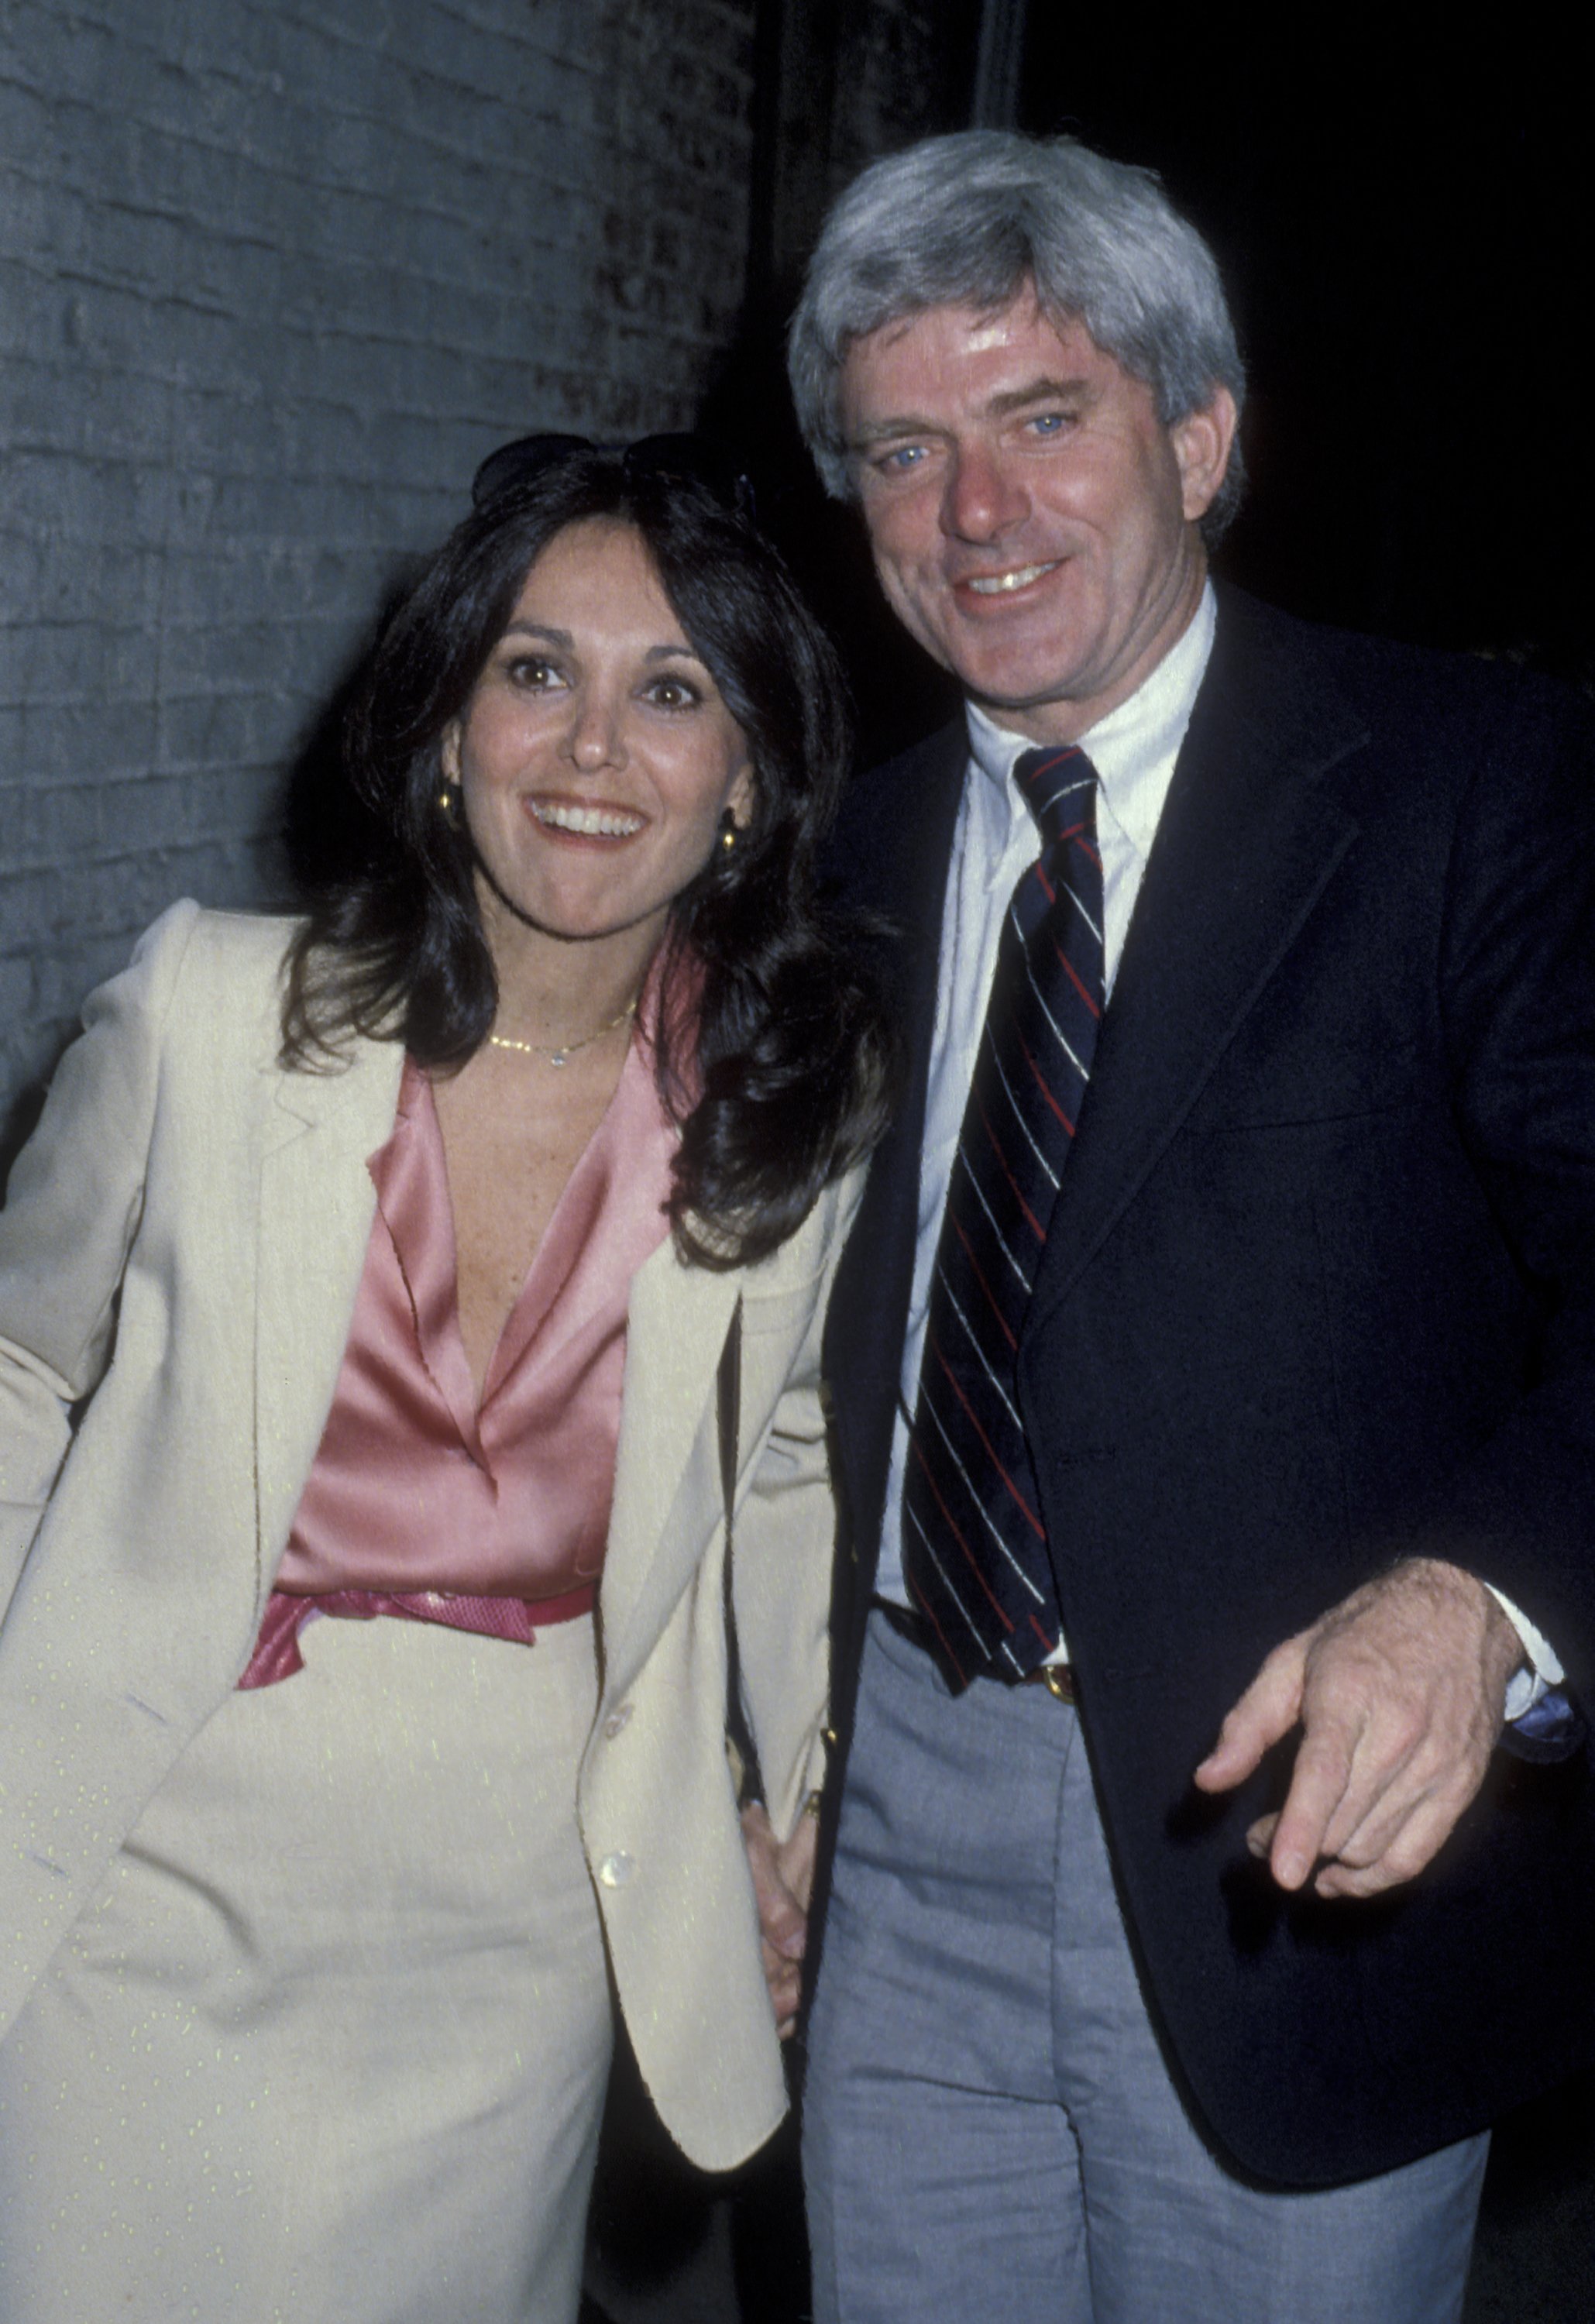 Marlo Thomas and Phil Donahue attend the opening of "The Goodbye People" on April 30, 1979 at the Belasco Theater in New York City | Source: Getty Images 